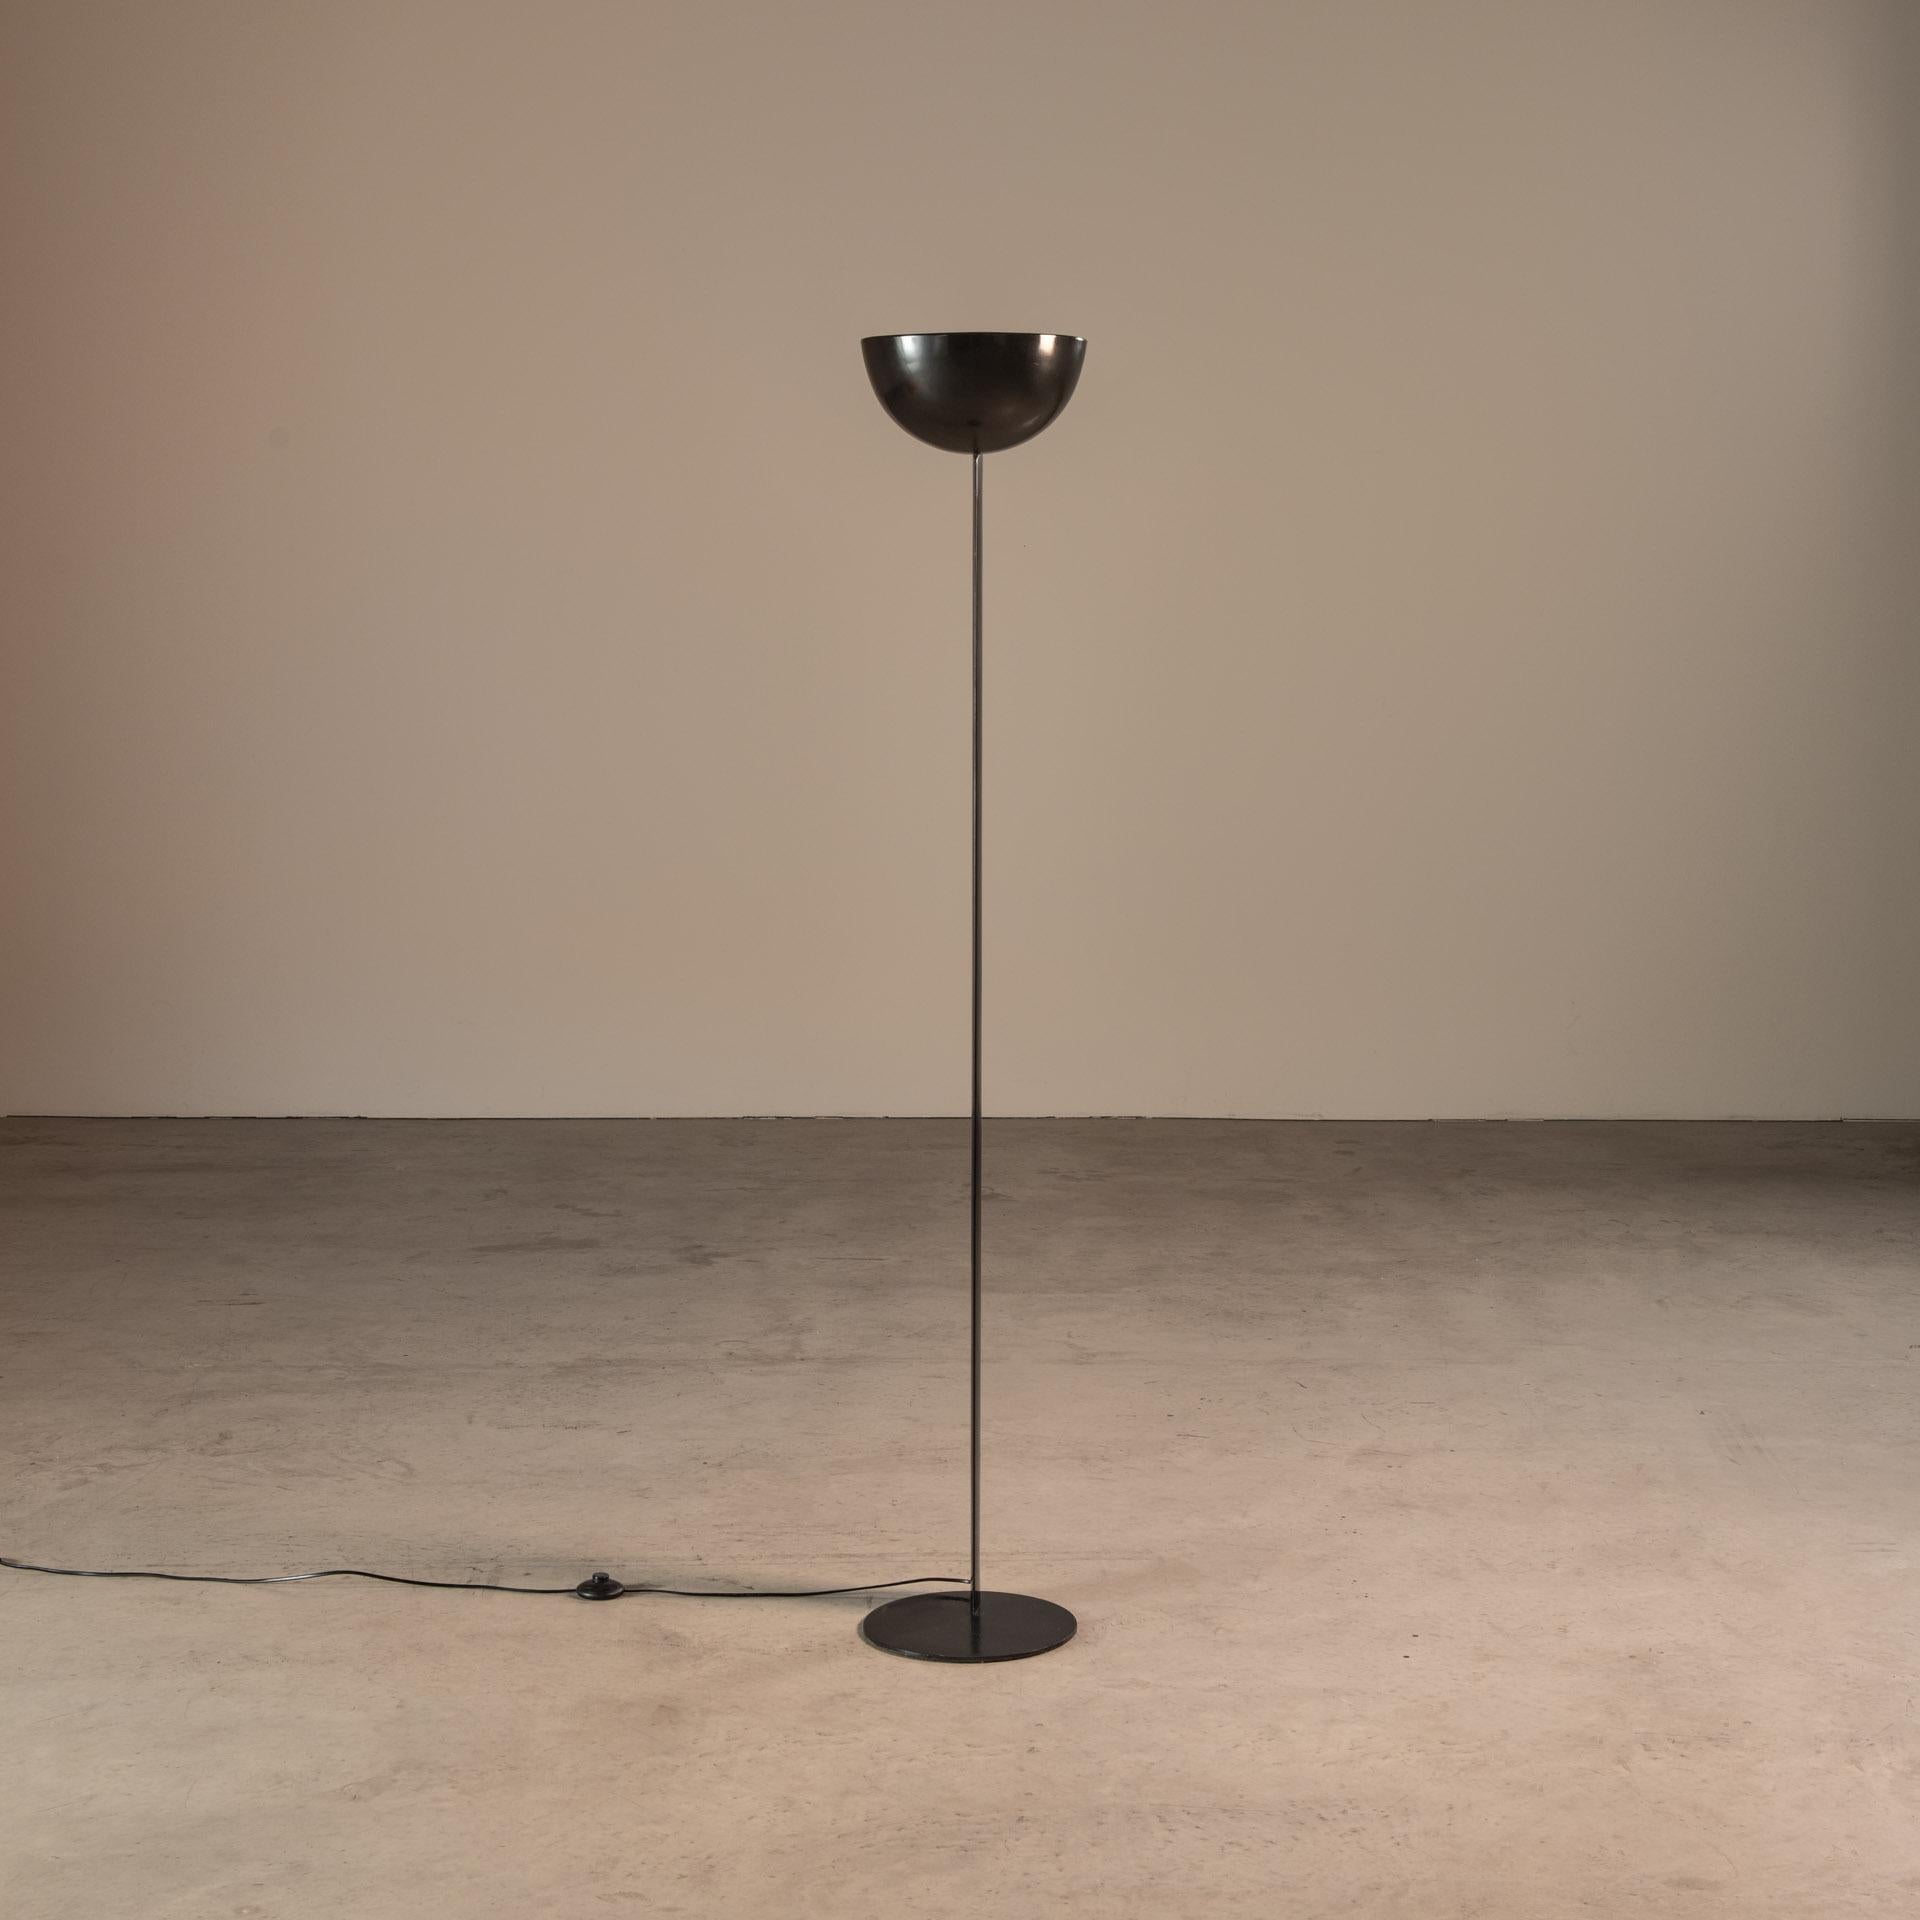 The black floor lamp is a mid-century modern design by Enrico Furio, created in the 1950s for his company Dominici. This particular lamp is recognized for its sleek design, featuring a polished, ebony-hued disc-shaped base and a slim, elongated